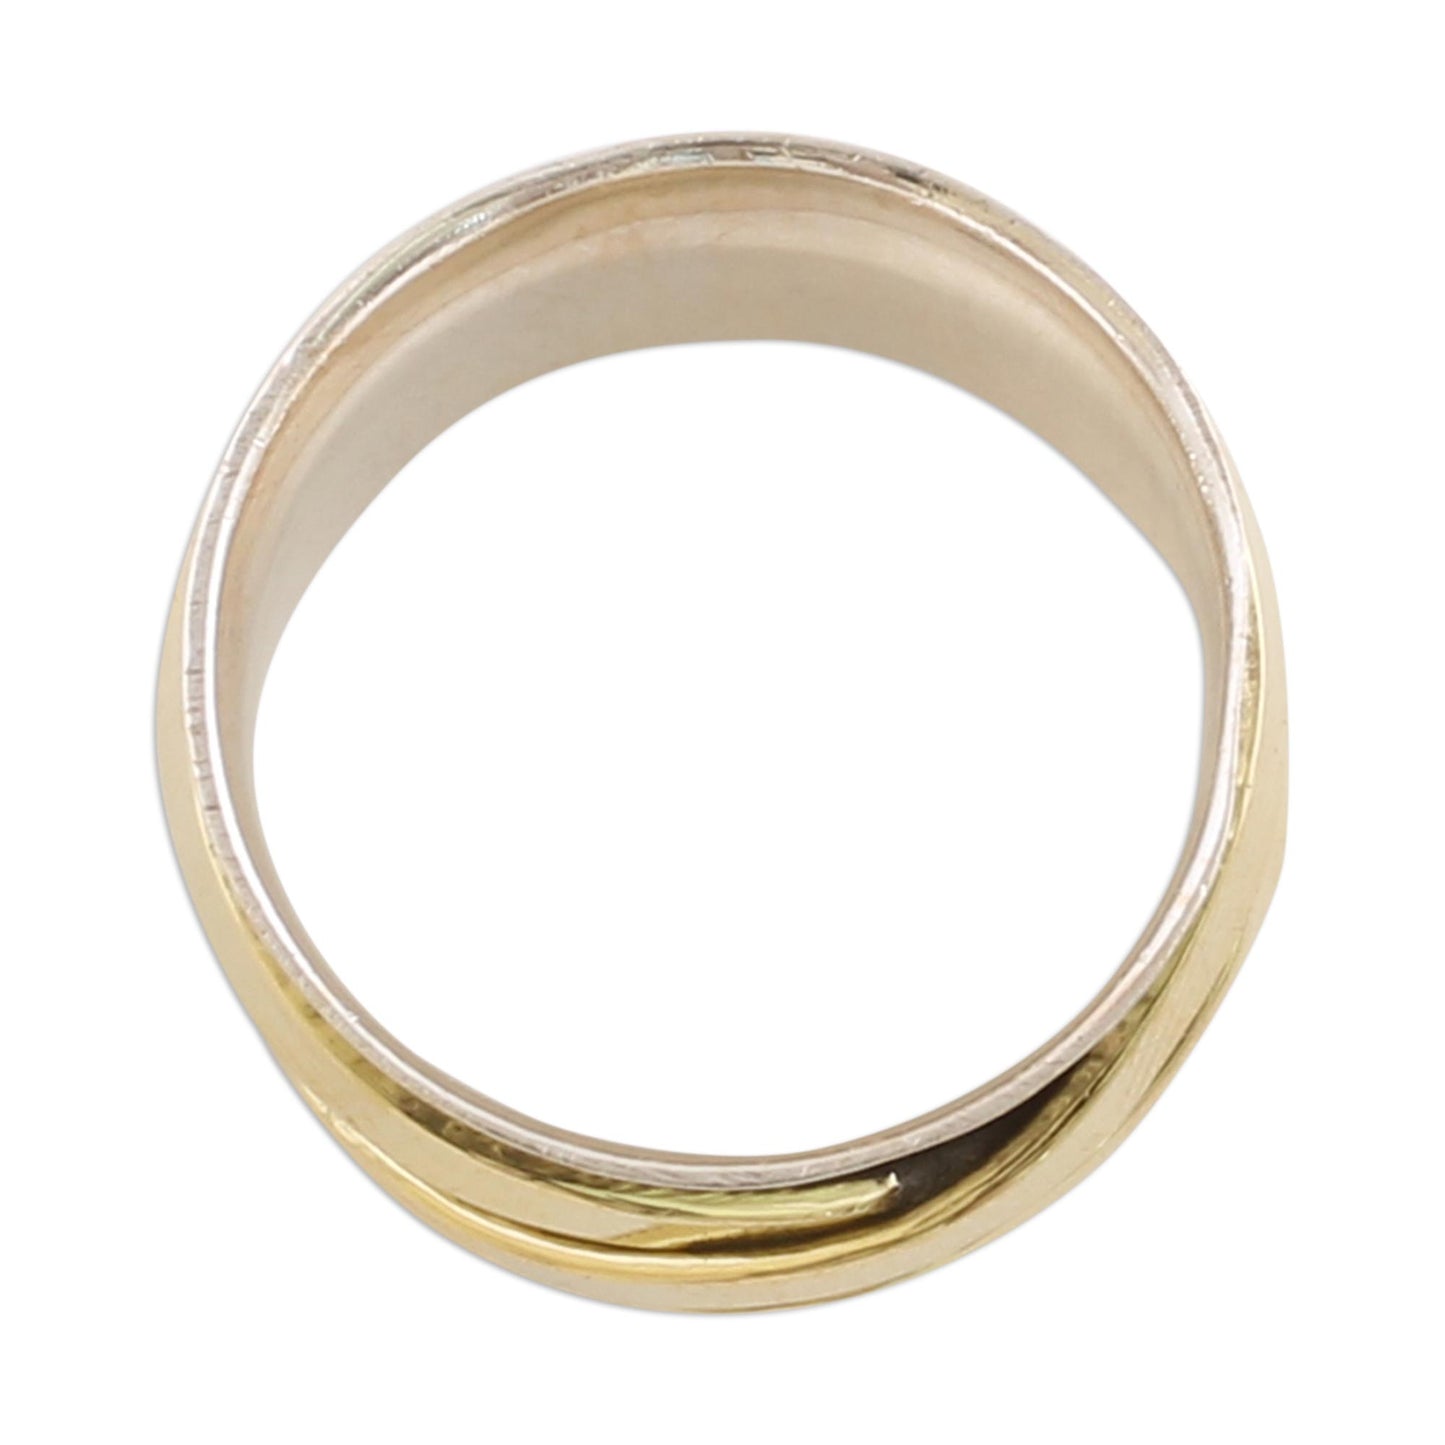 Crisscrossing Grace Silver Brass Band Ring